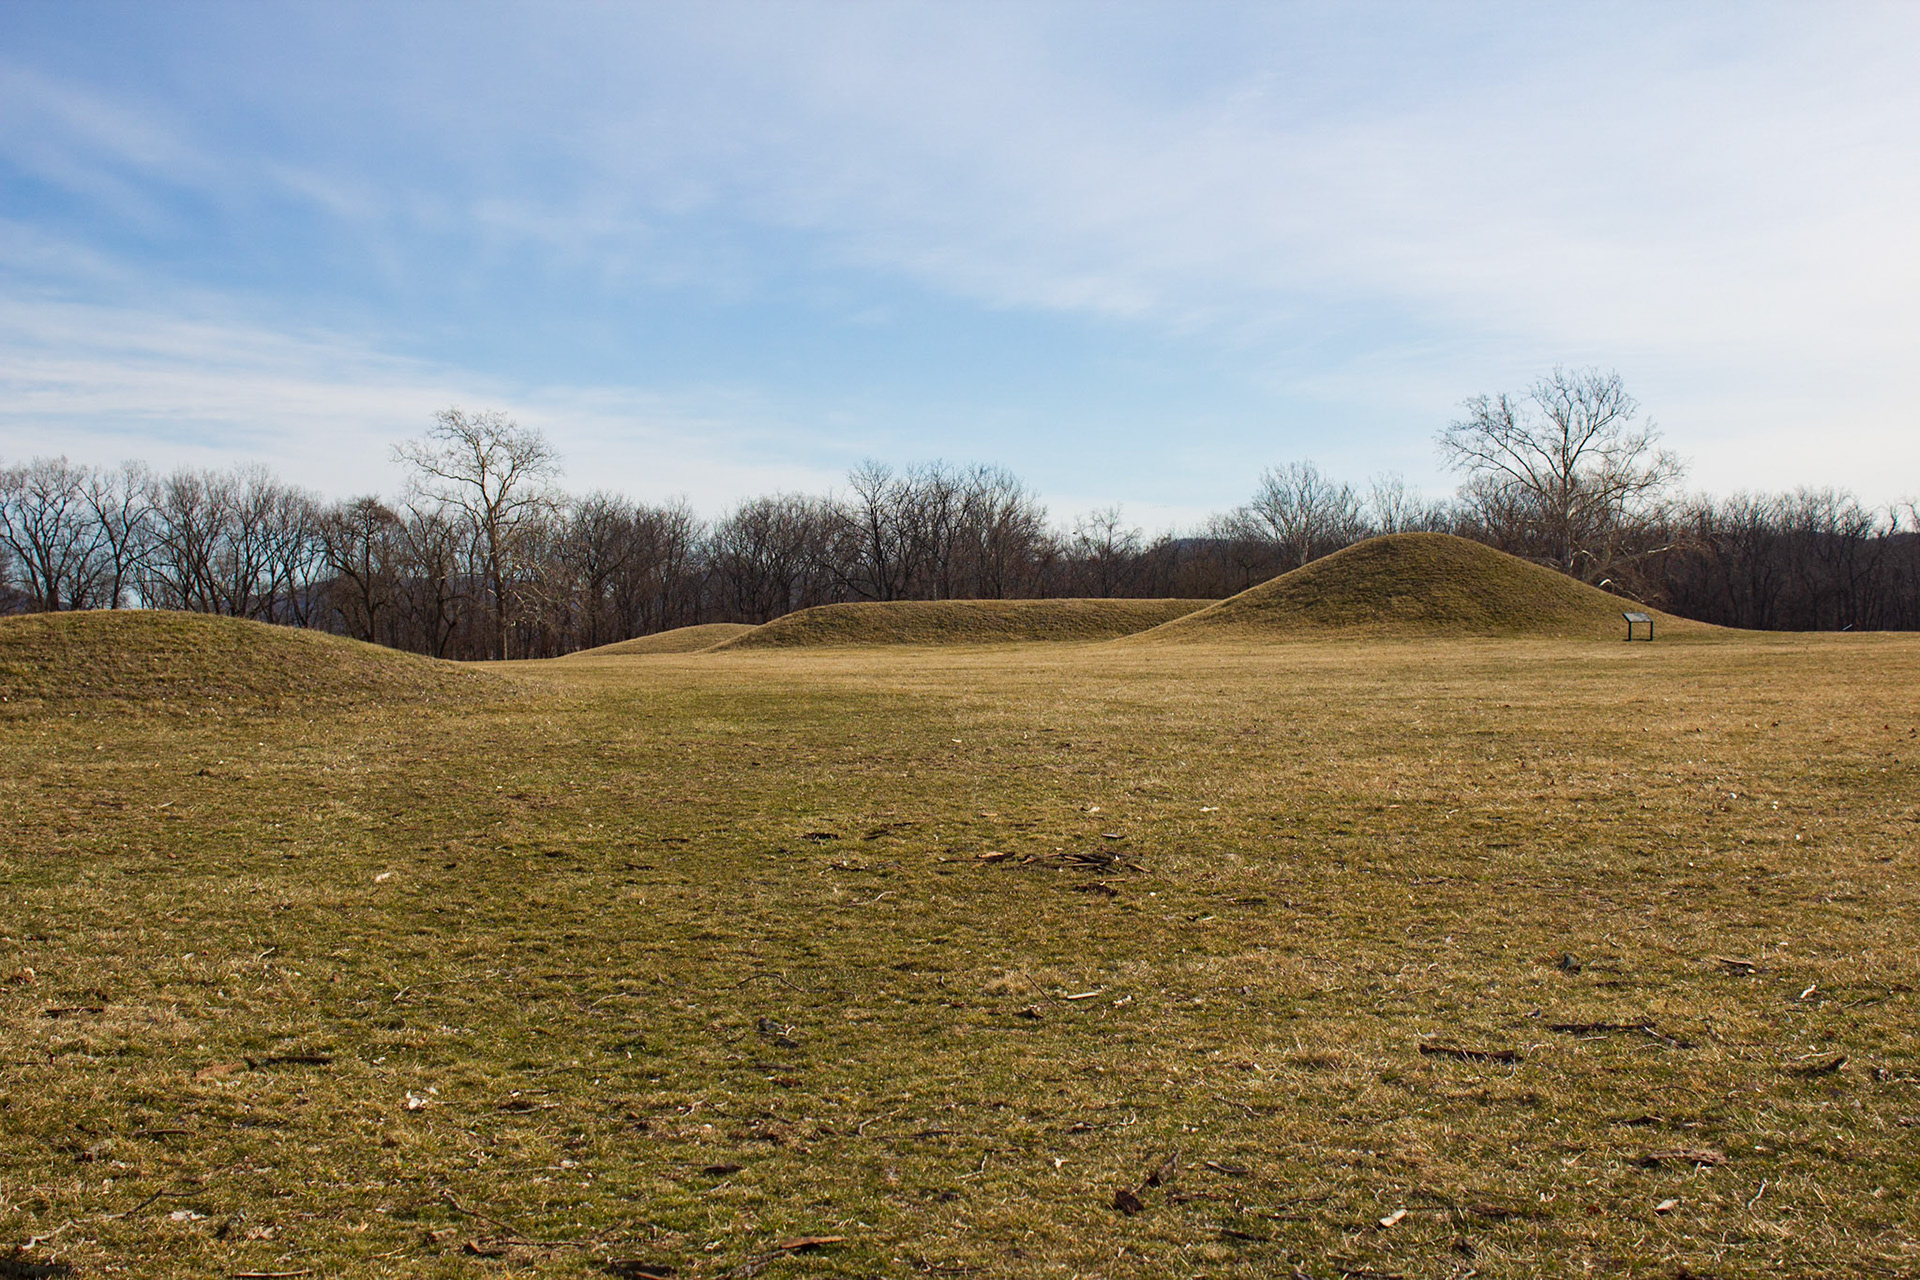 Our NPS Travels - Hopewell Culture National Historical Park